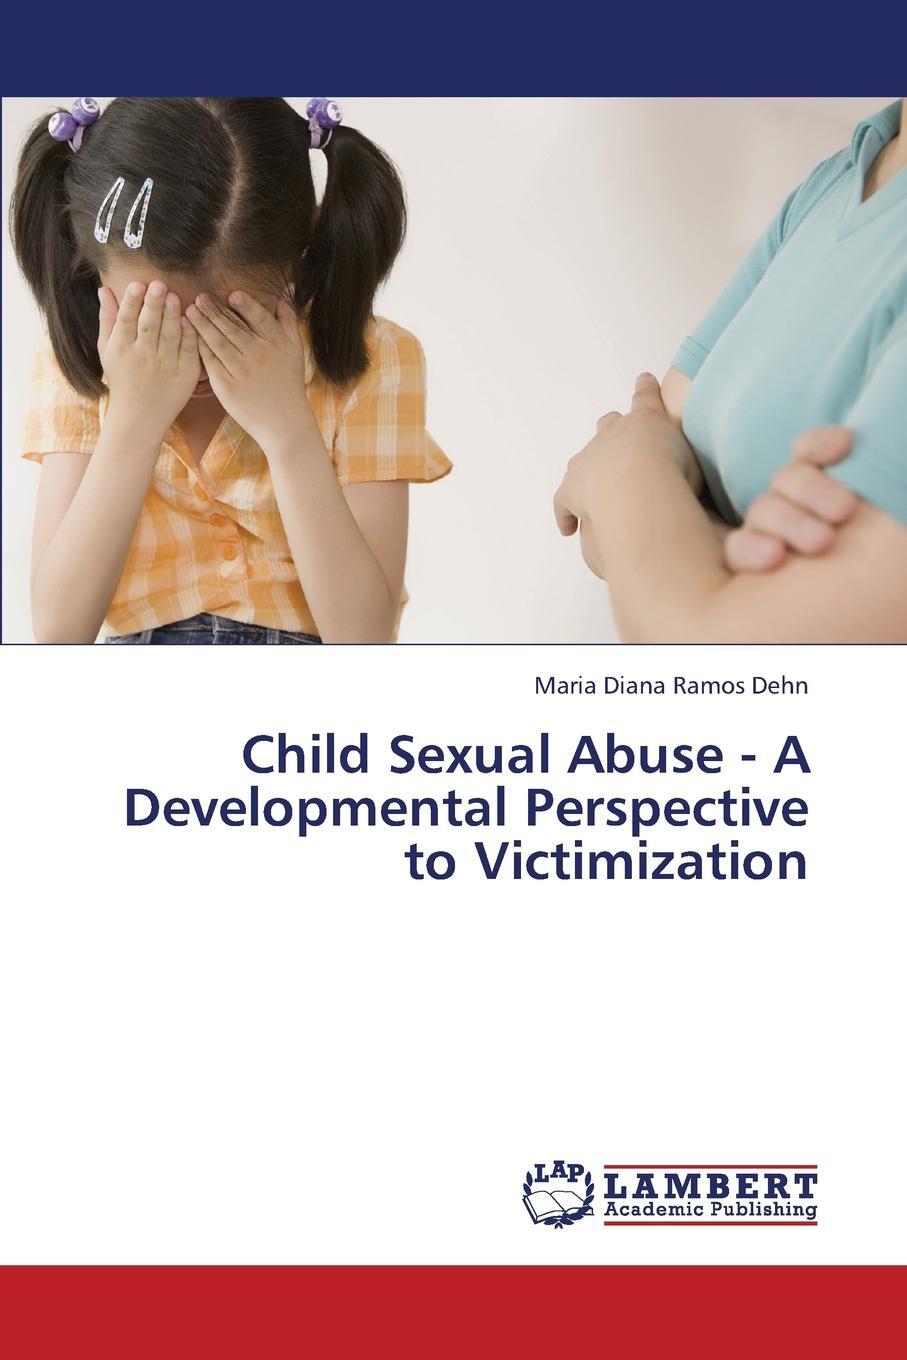 фото Child Sexual Abuse - A Developmental Perspective to Victimization